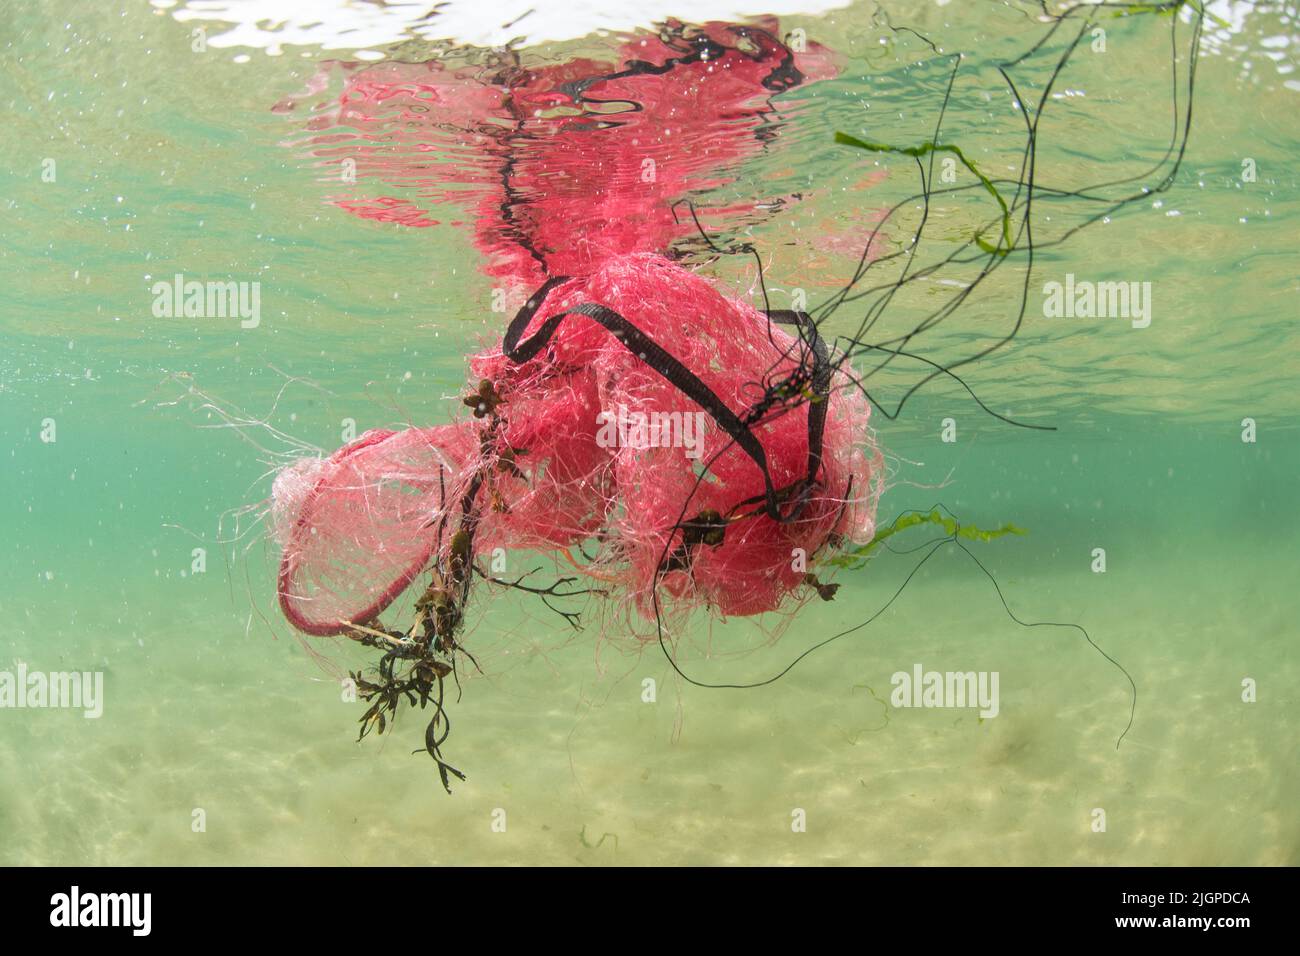 Red mesh bag breaking apart in the sea creating a potential entanglement hazard for widlife Stock Photo